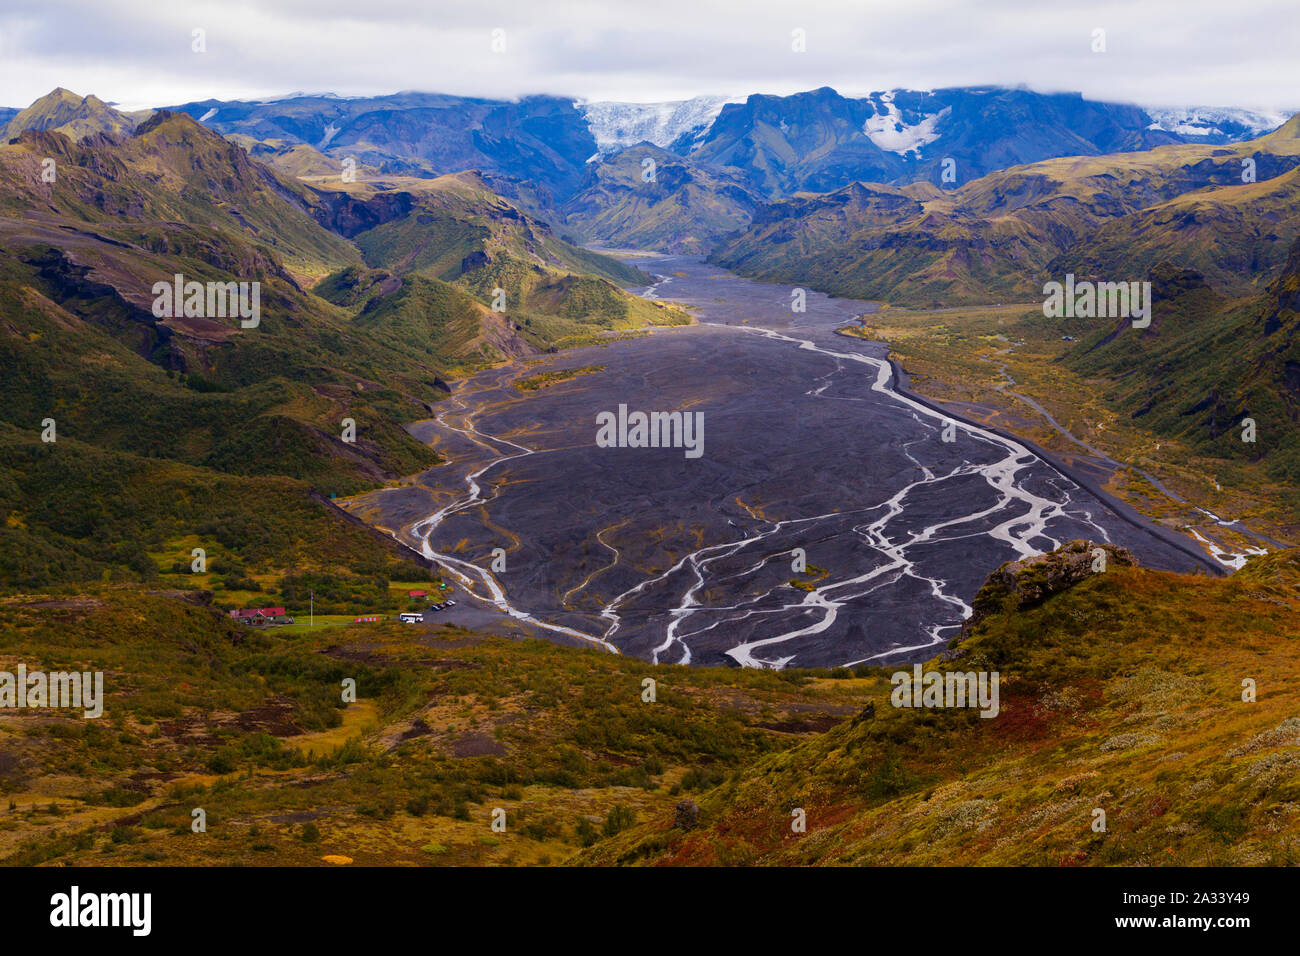 Mountain landscape and Krossa river in the Icelandic interior, Thorsmork, Iceland Stock Photo